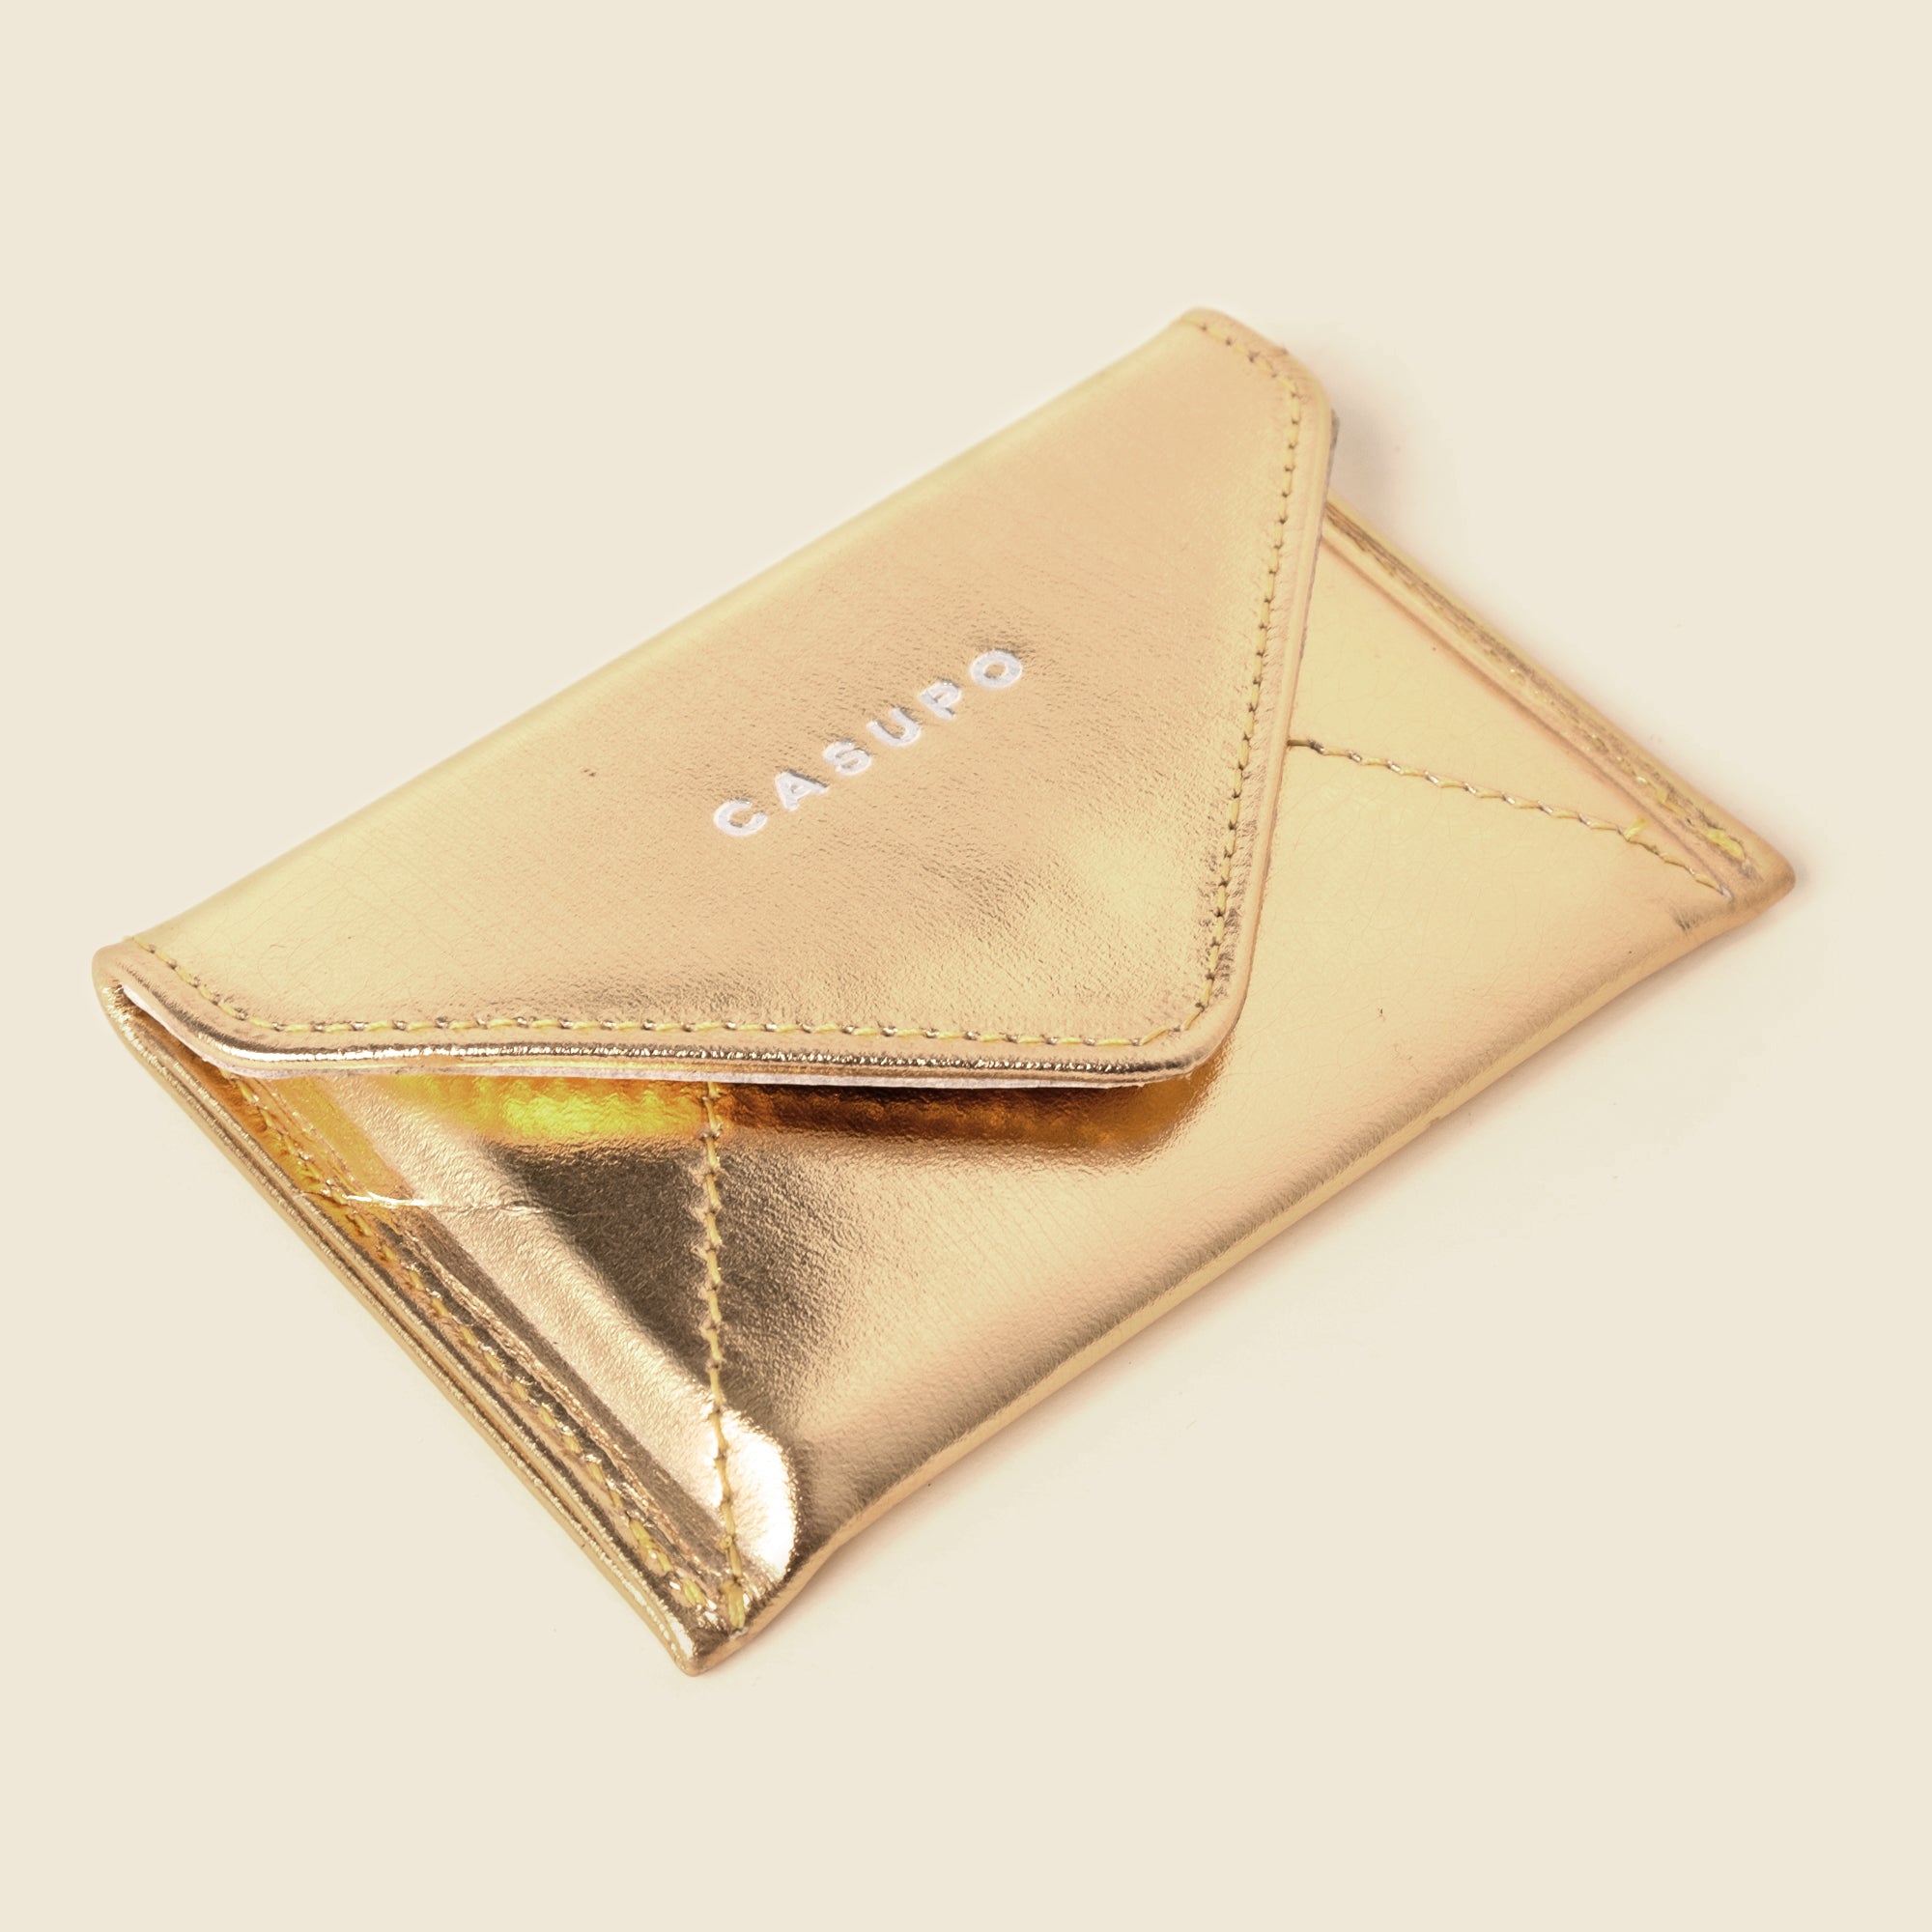 Mini Envelope Wallet With RFID protection - Gold